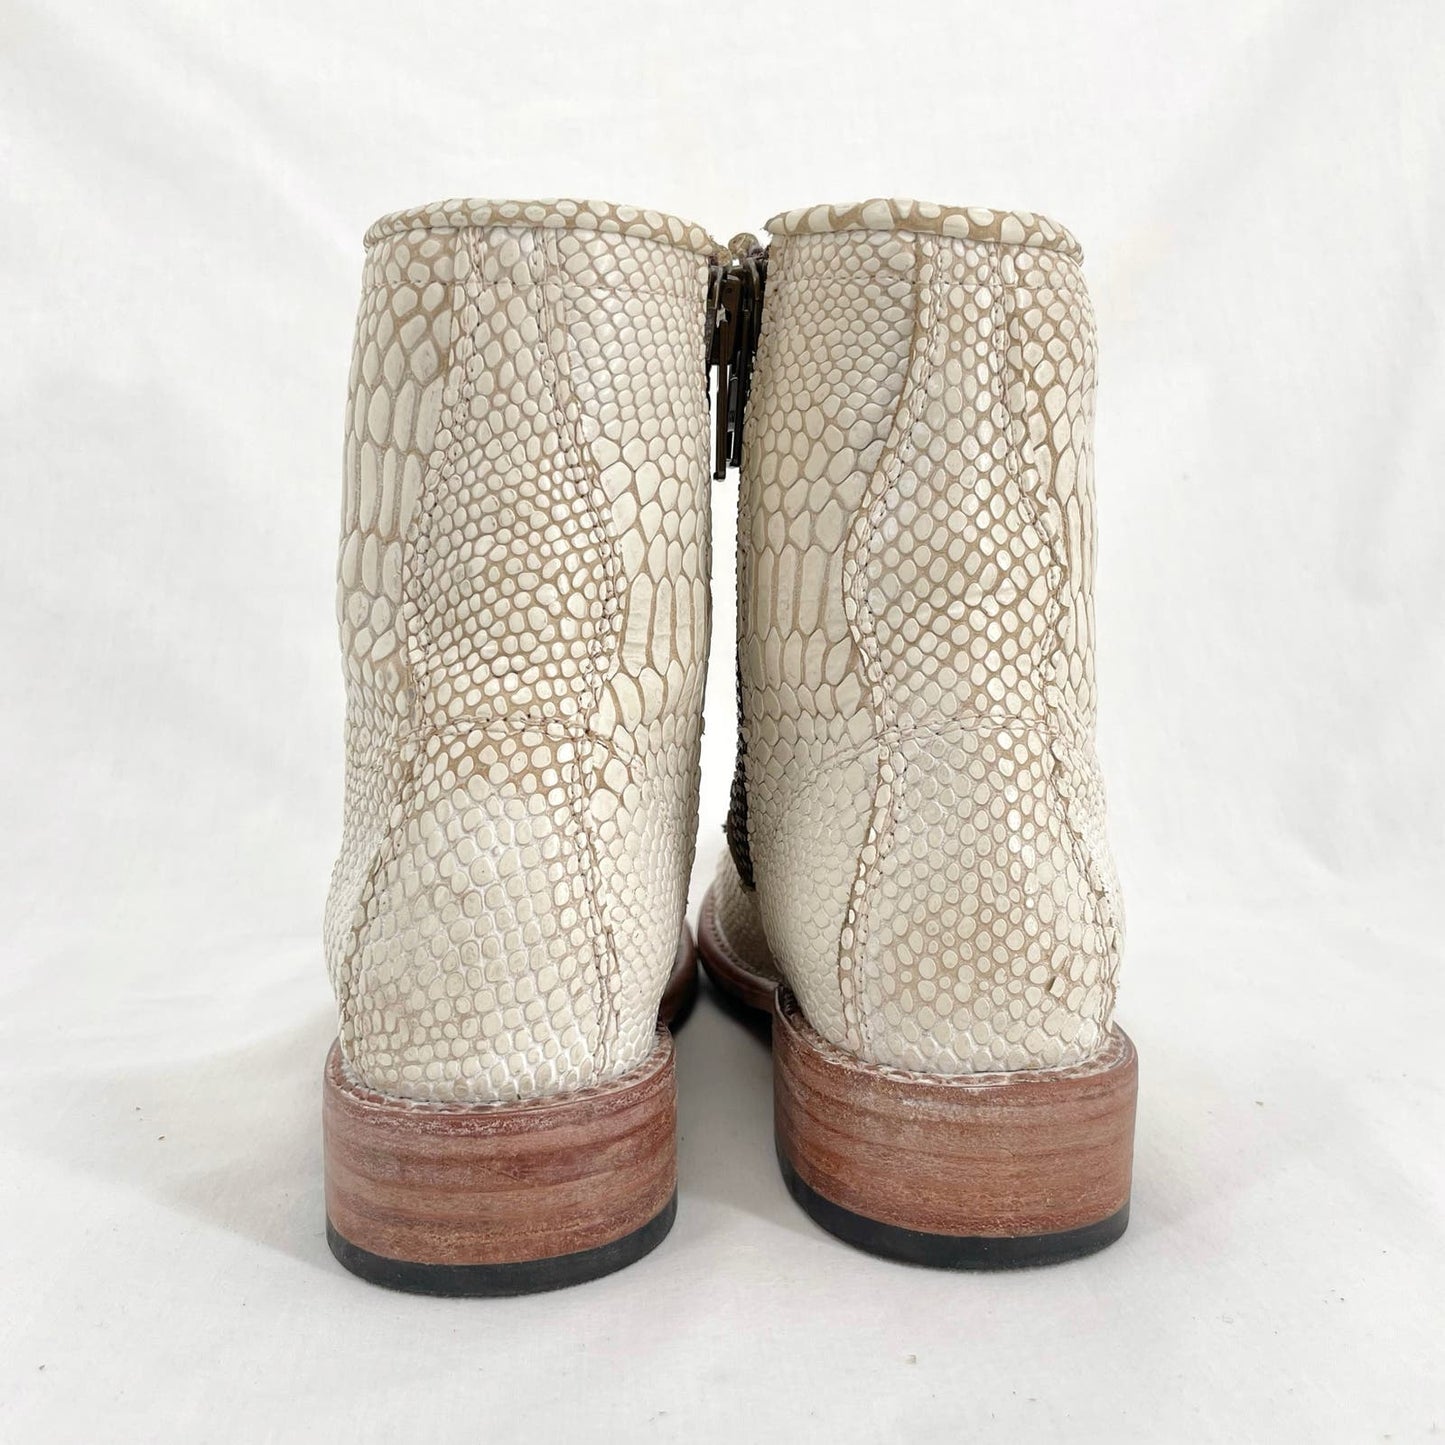 Freebird by Steven Manchester White Snake Leather Wrap Lace Up Boho Boots Size 6